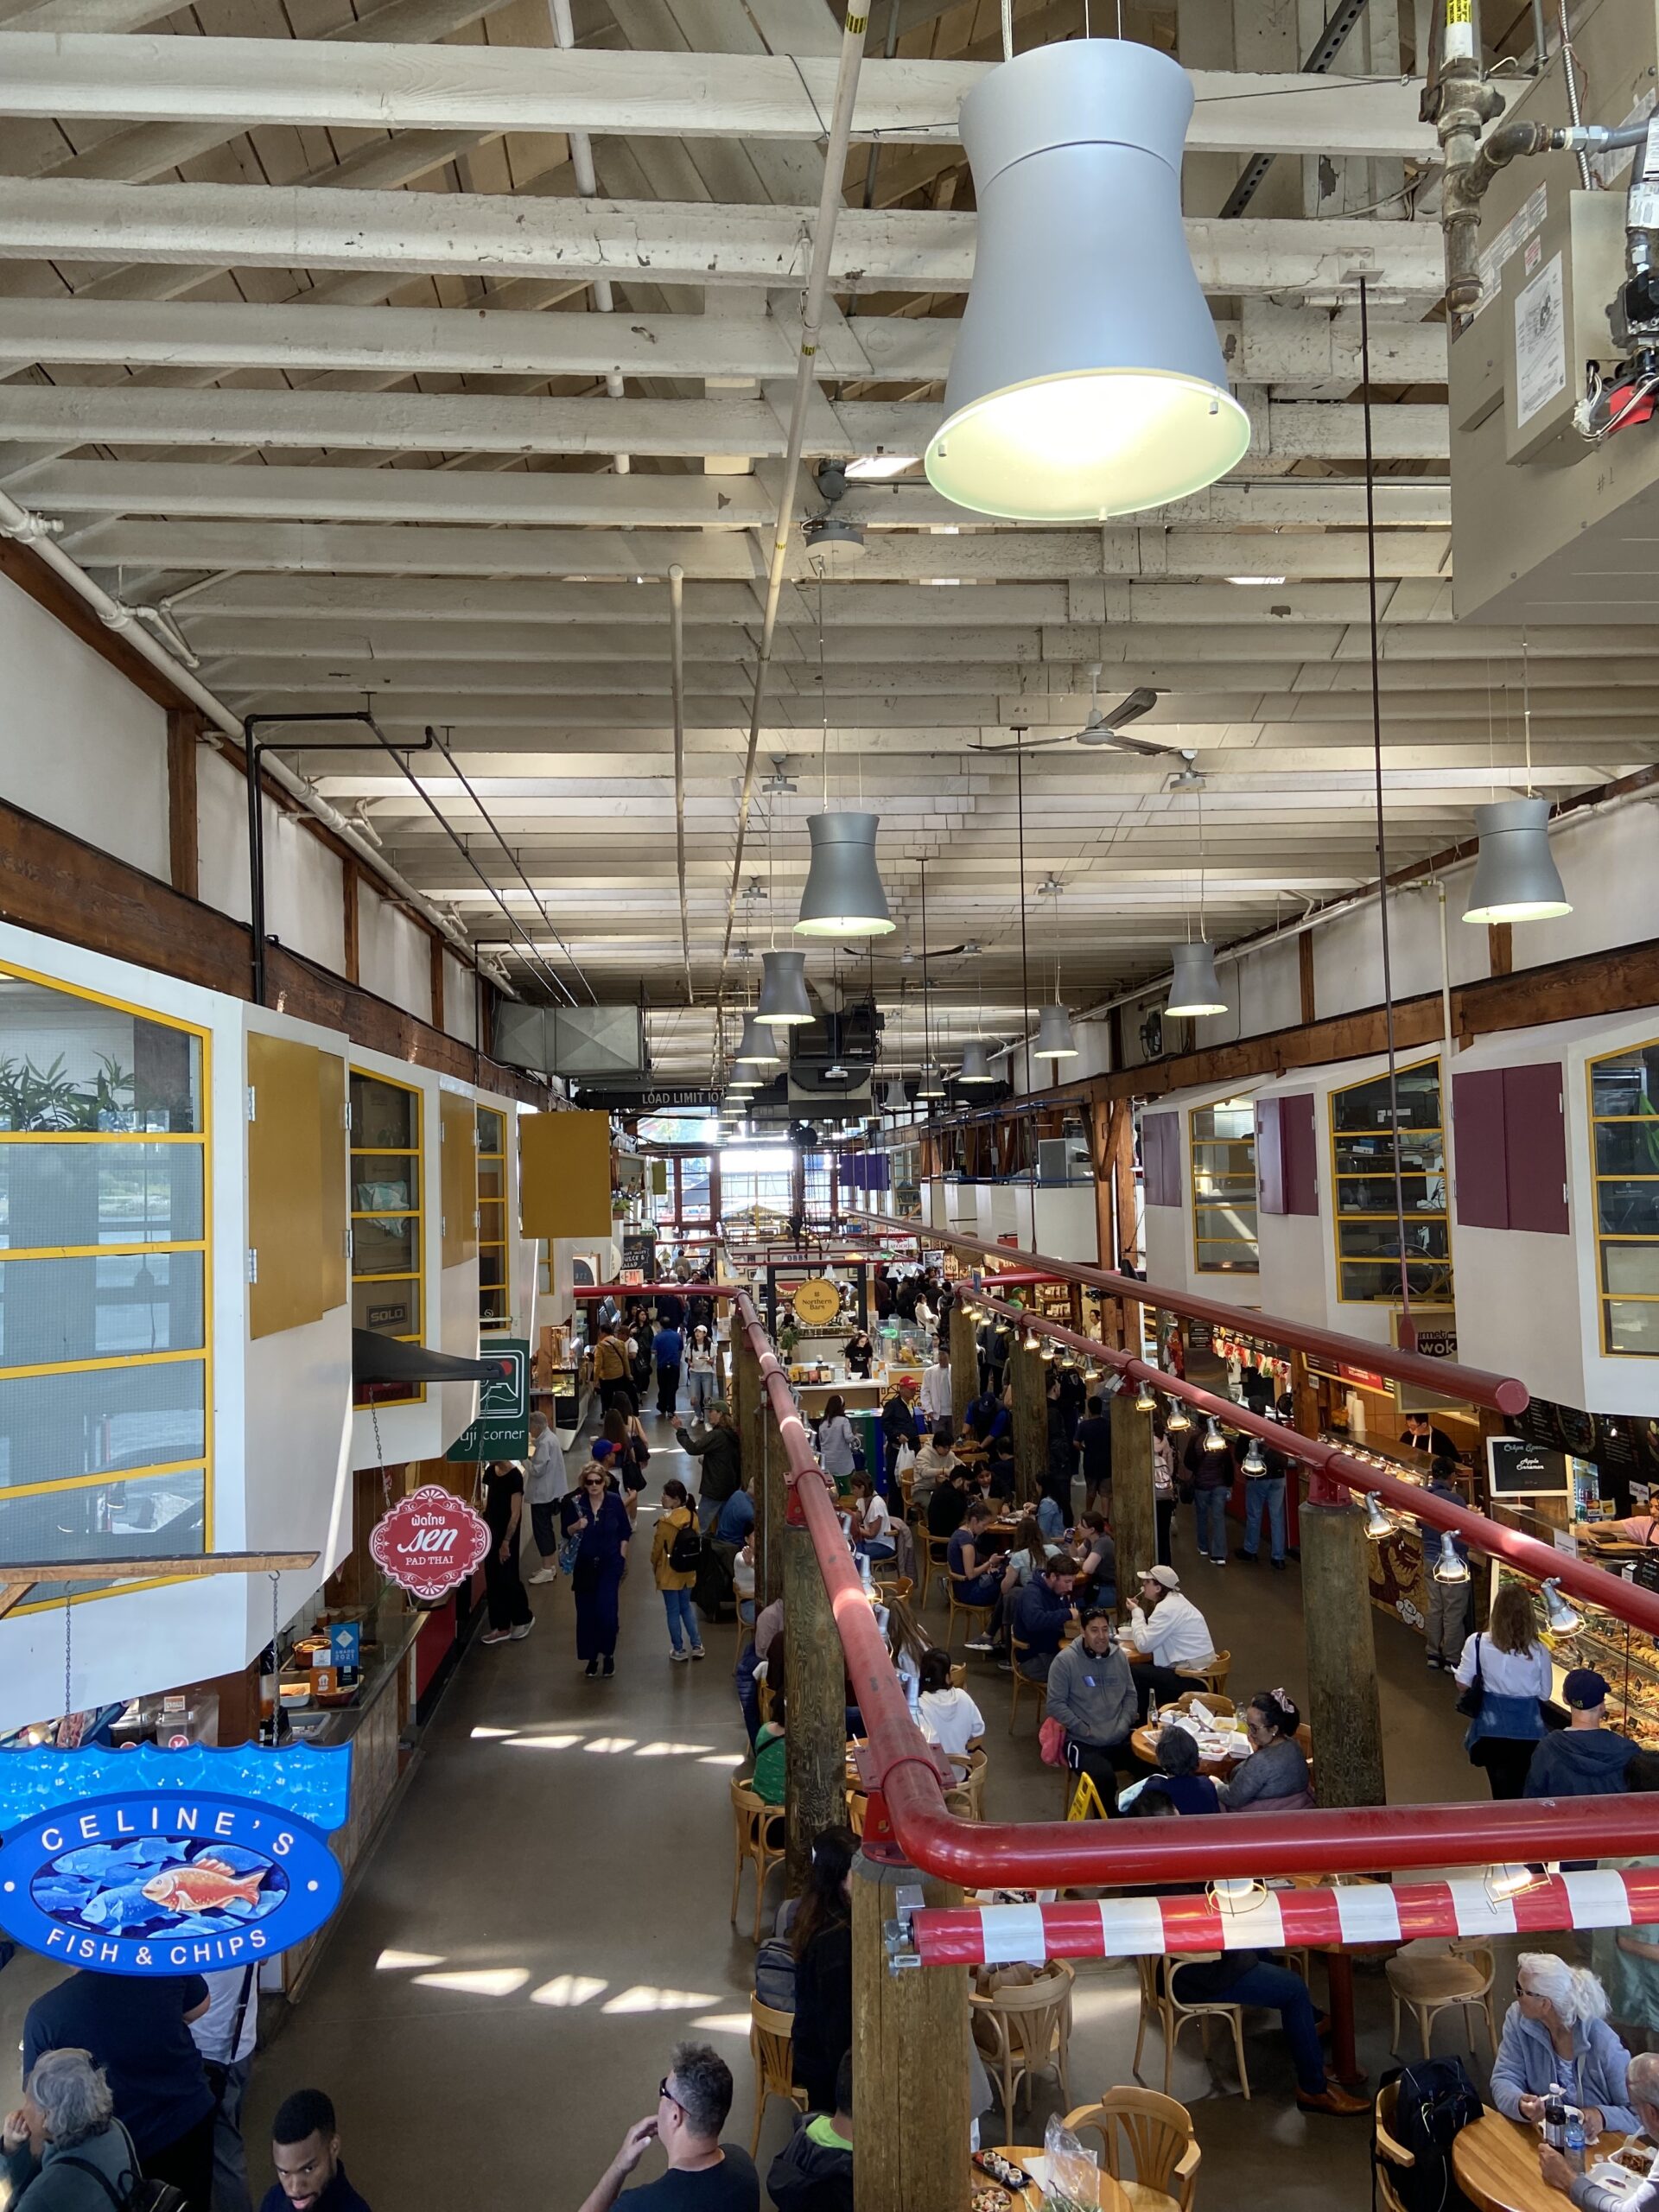 A top view of the food section of Granville Island Public Market. Various individuals sit at tables while enjoying food from the stalls surrounding them. Colorful awnings and signage are displayed throughout the space.